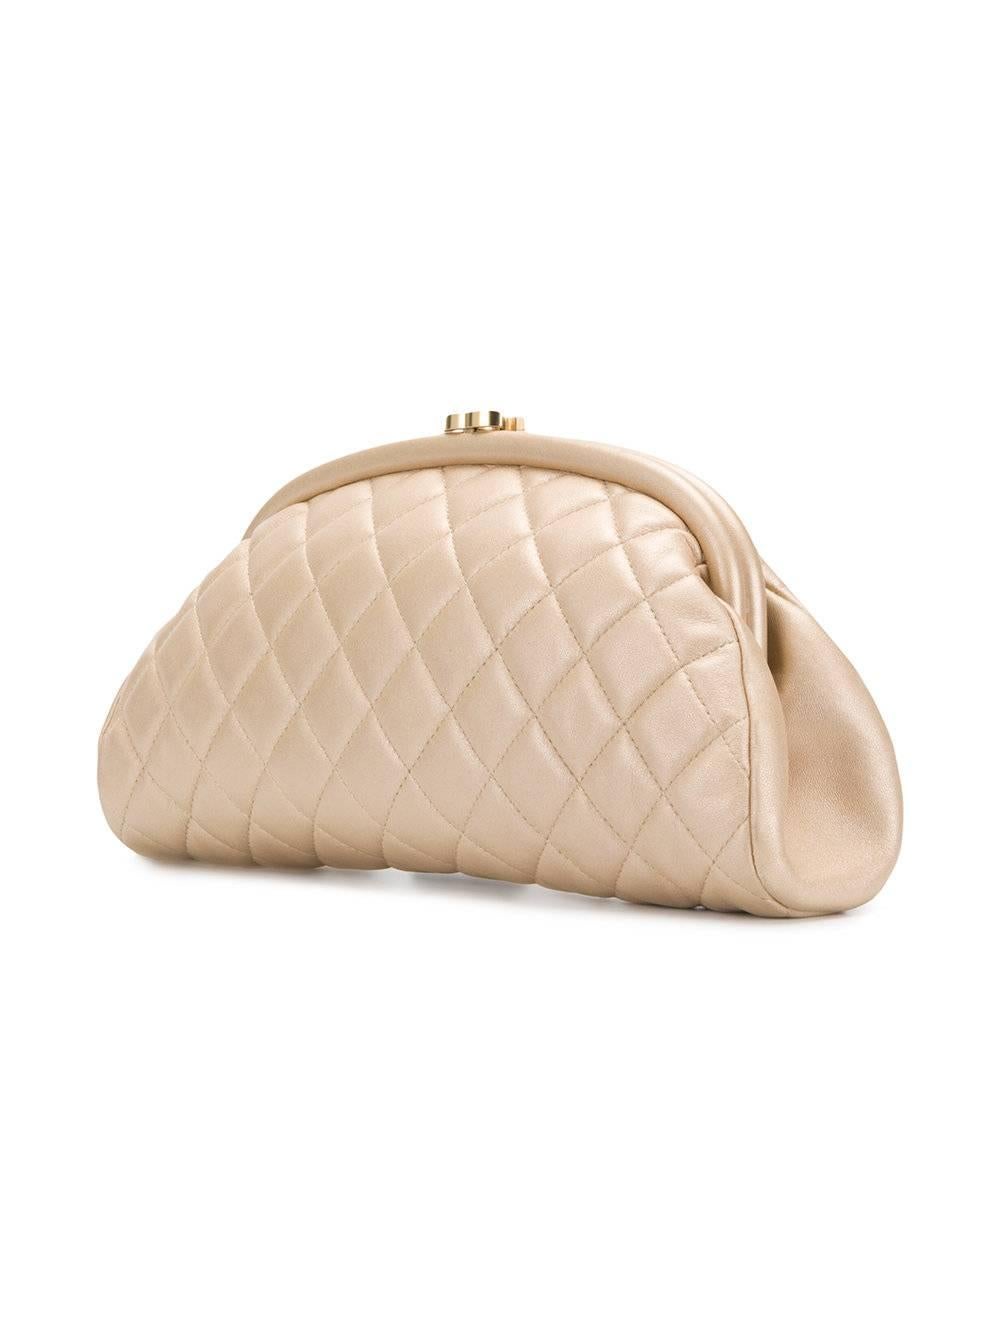 A rare design from Chanel, this half-moon shaped handbag is an unusual piece that easily moves from day to night. Crafted from quilted lambskin, Its champagne hue is accented by gold-tone hardware, including a Chanel monogram clasp. The design